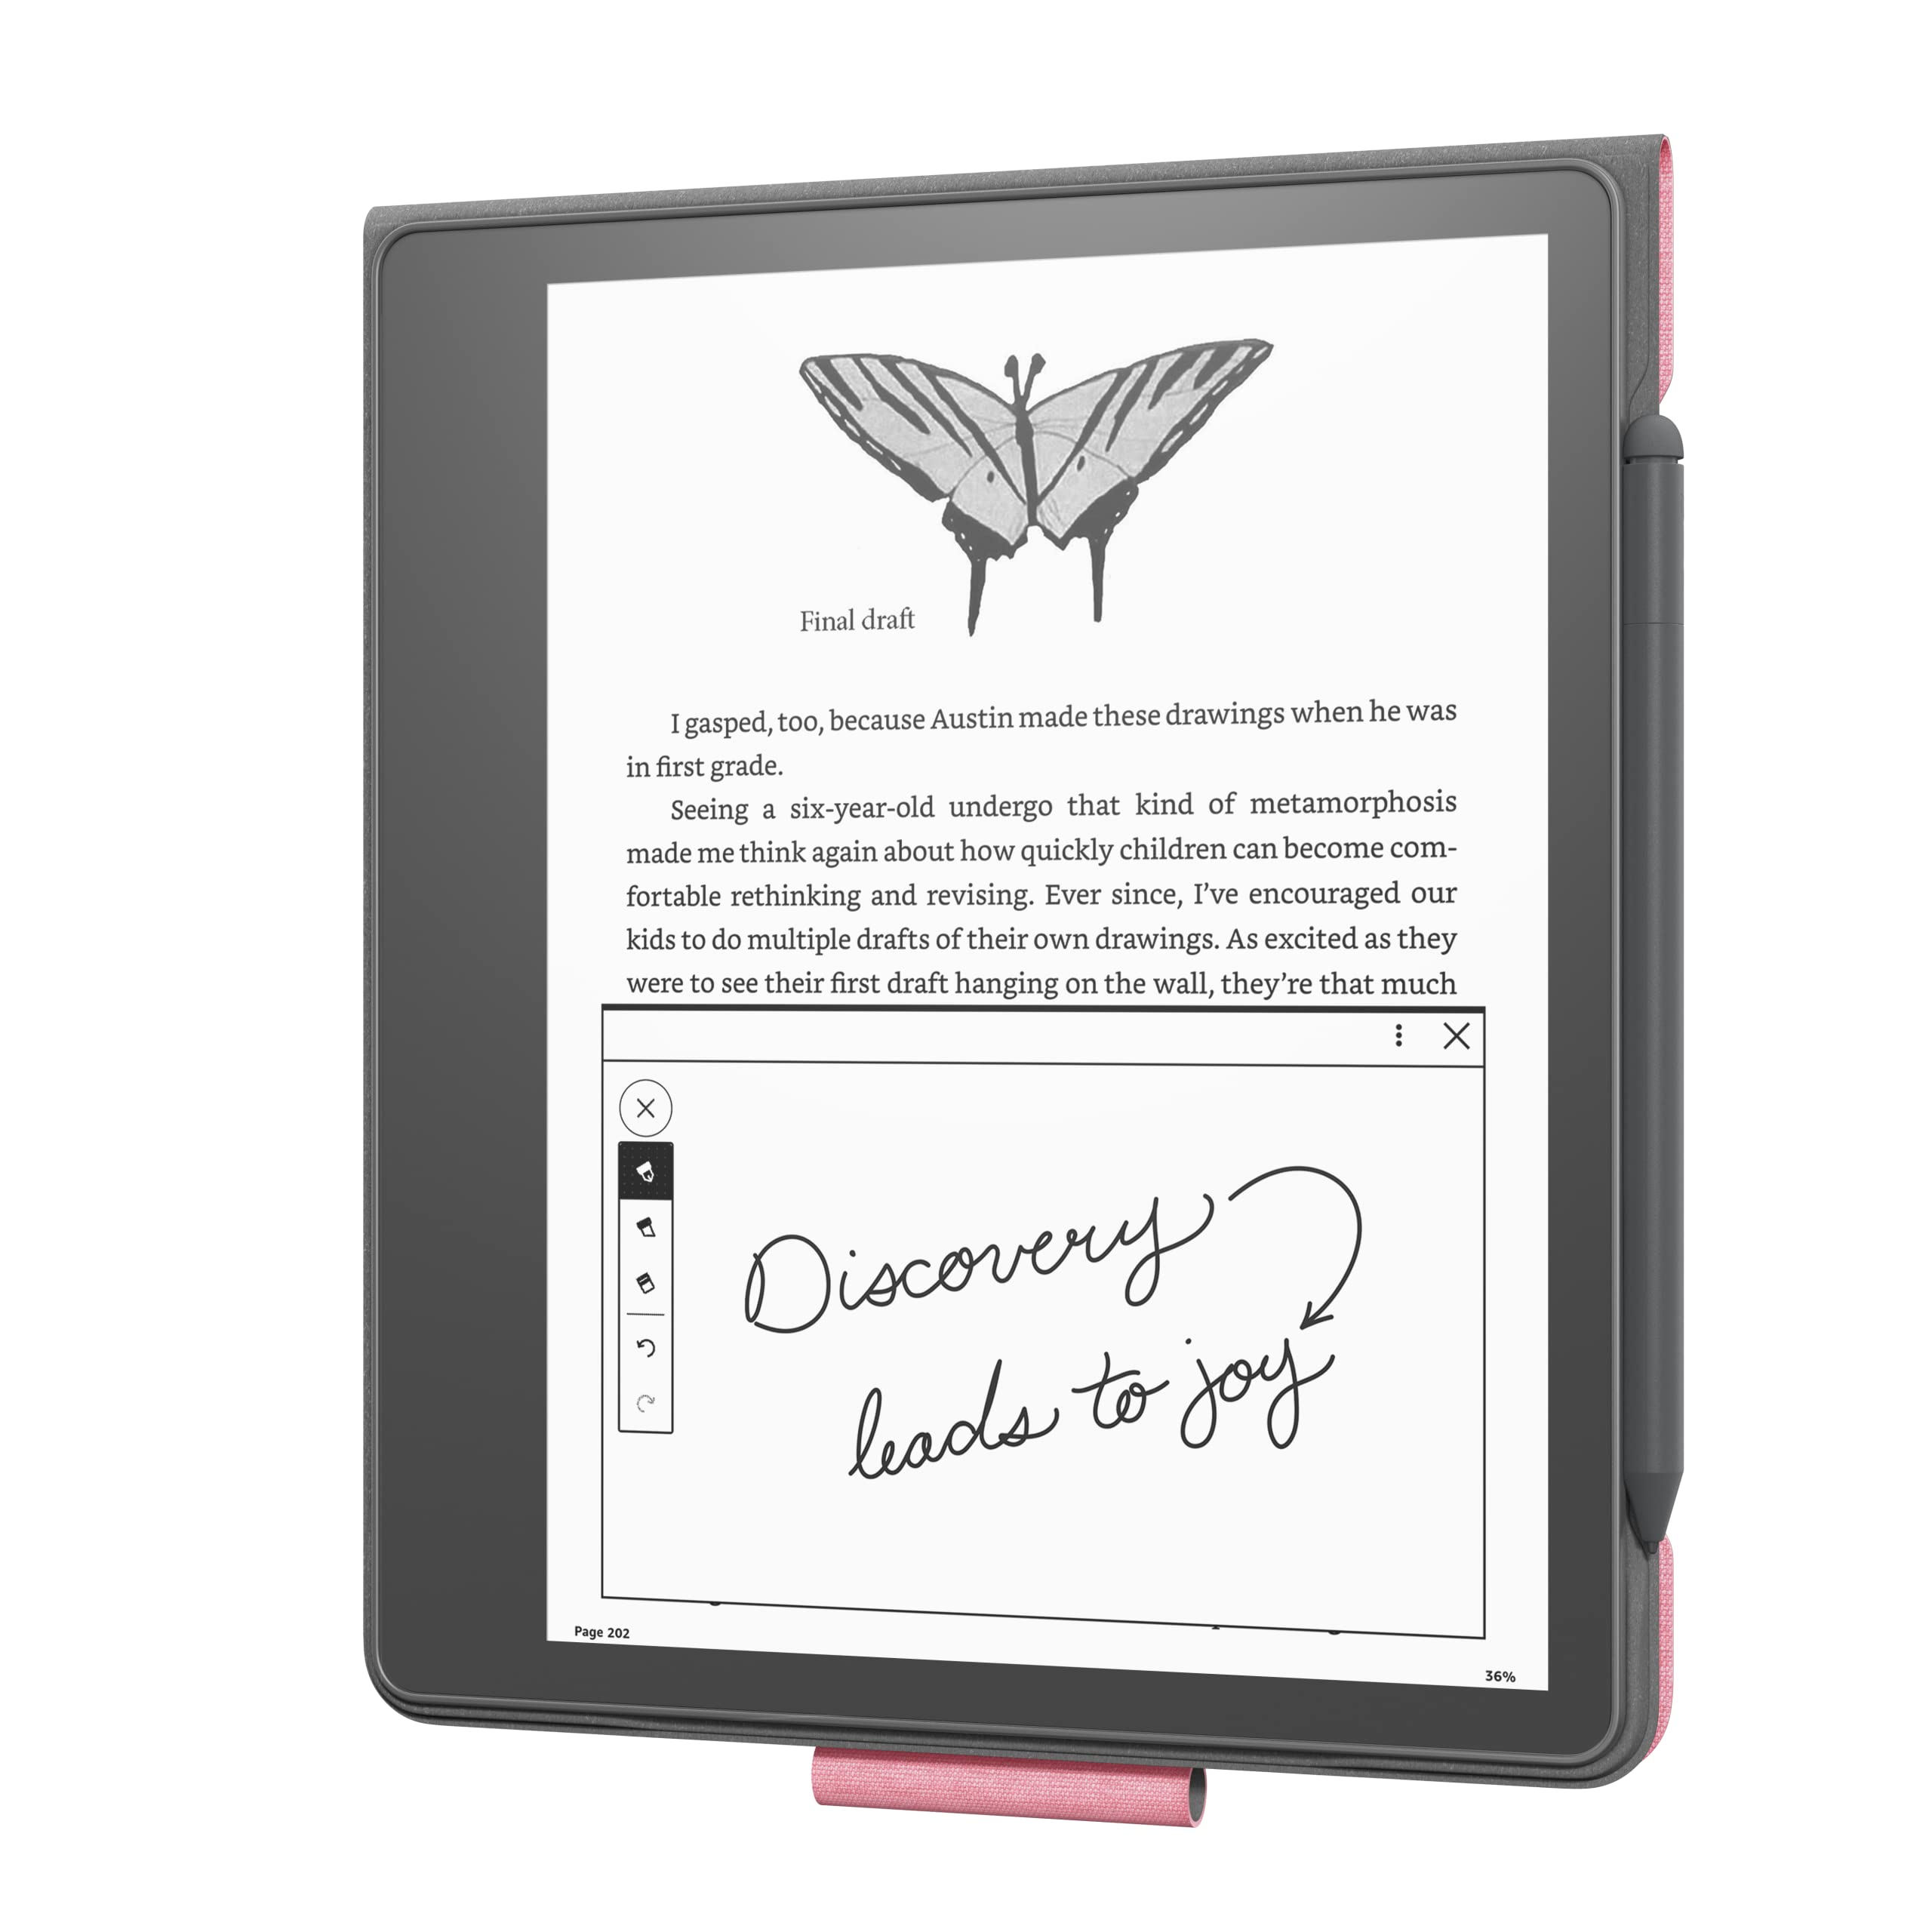 Kindle Scribe Fabric Folio Cover with Magnetic Attach (only fits Kindle Scribe) - Rose